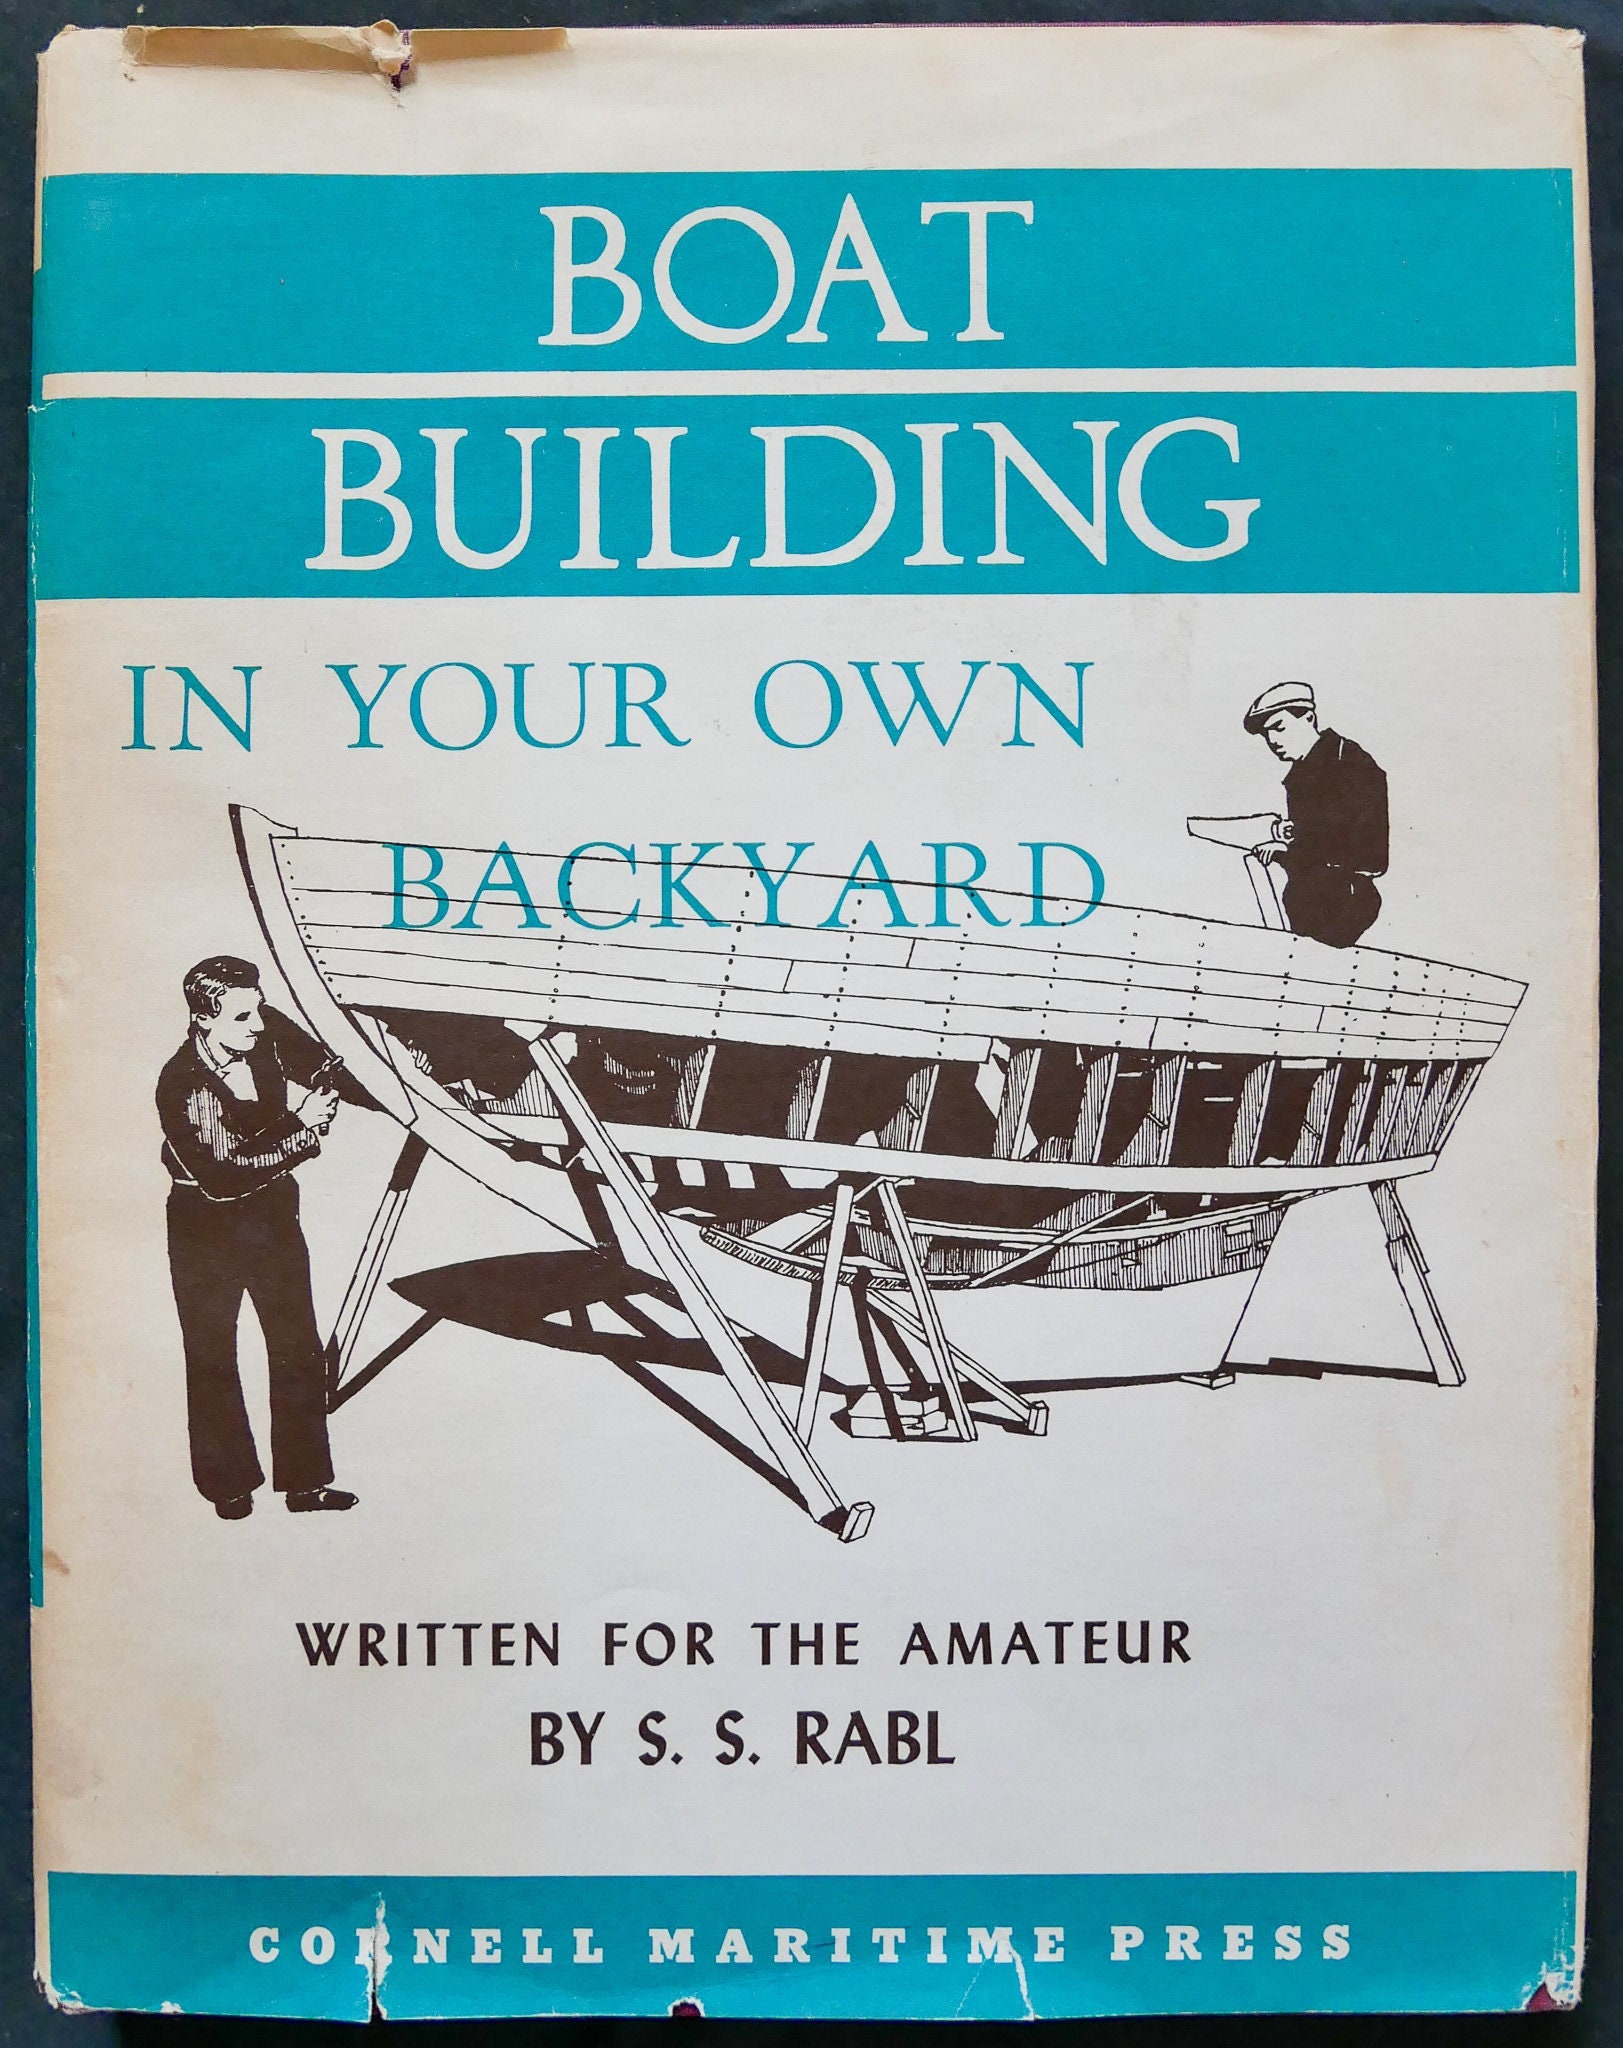 Boat Building in Your Own Backyard 1958 by S